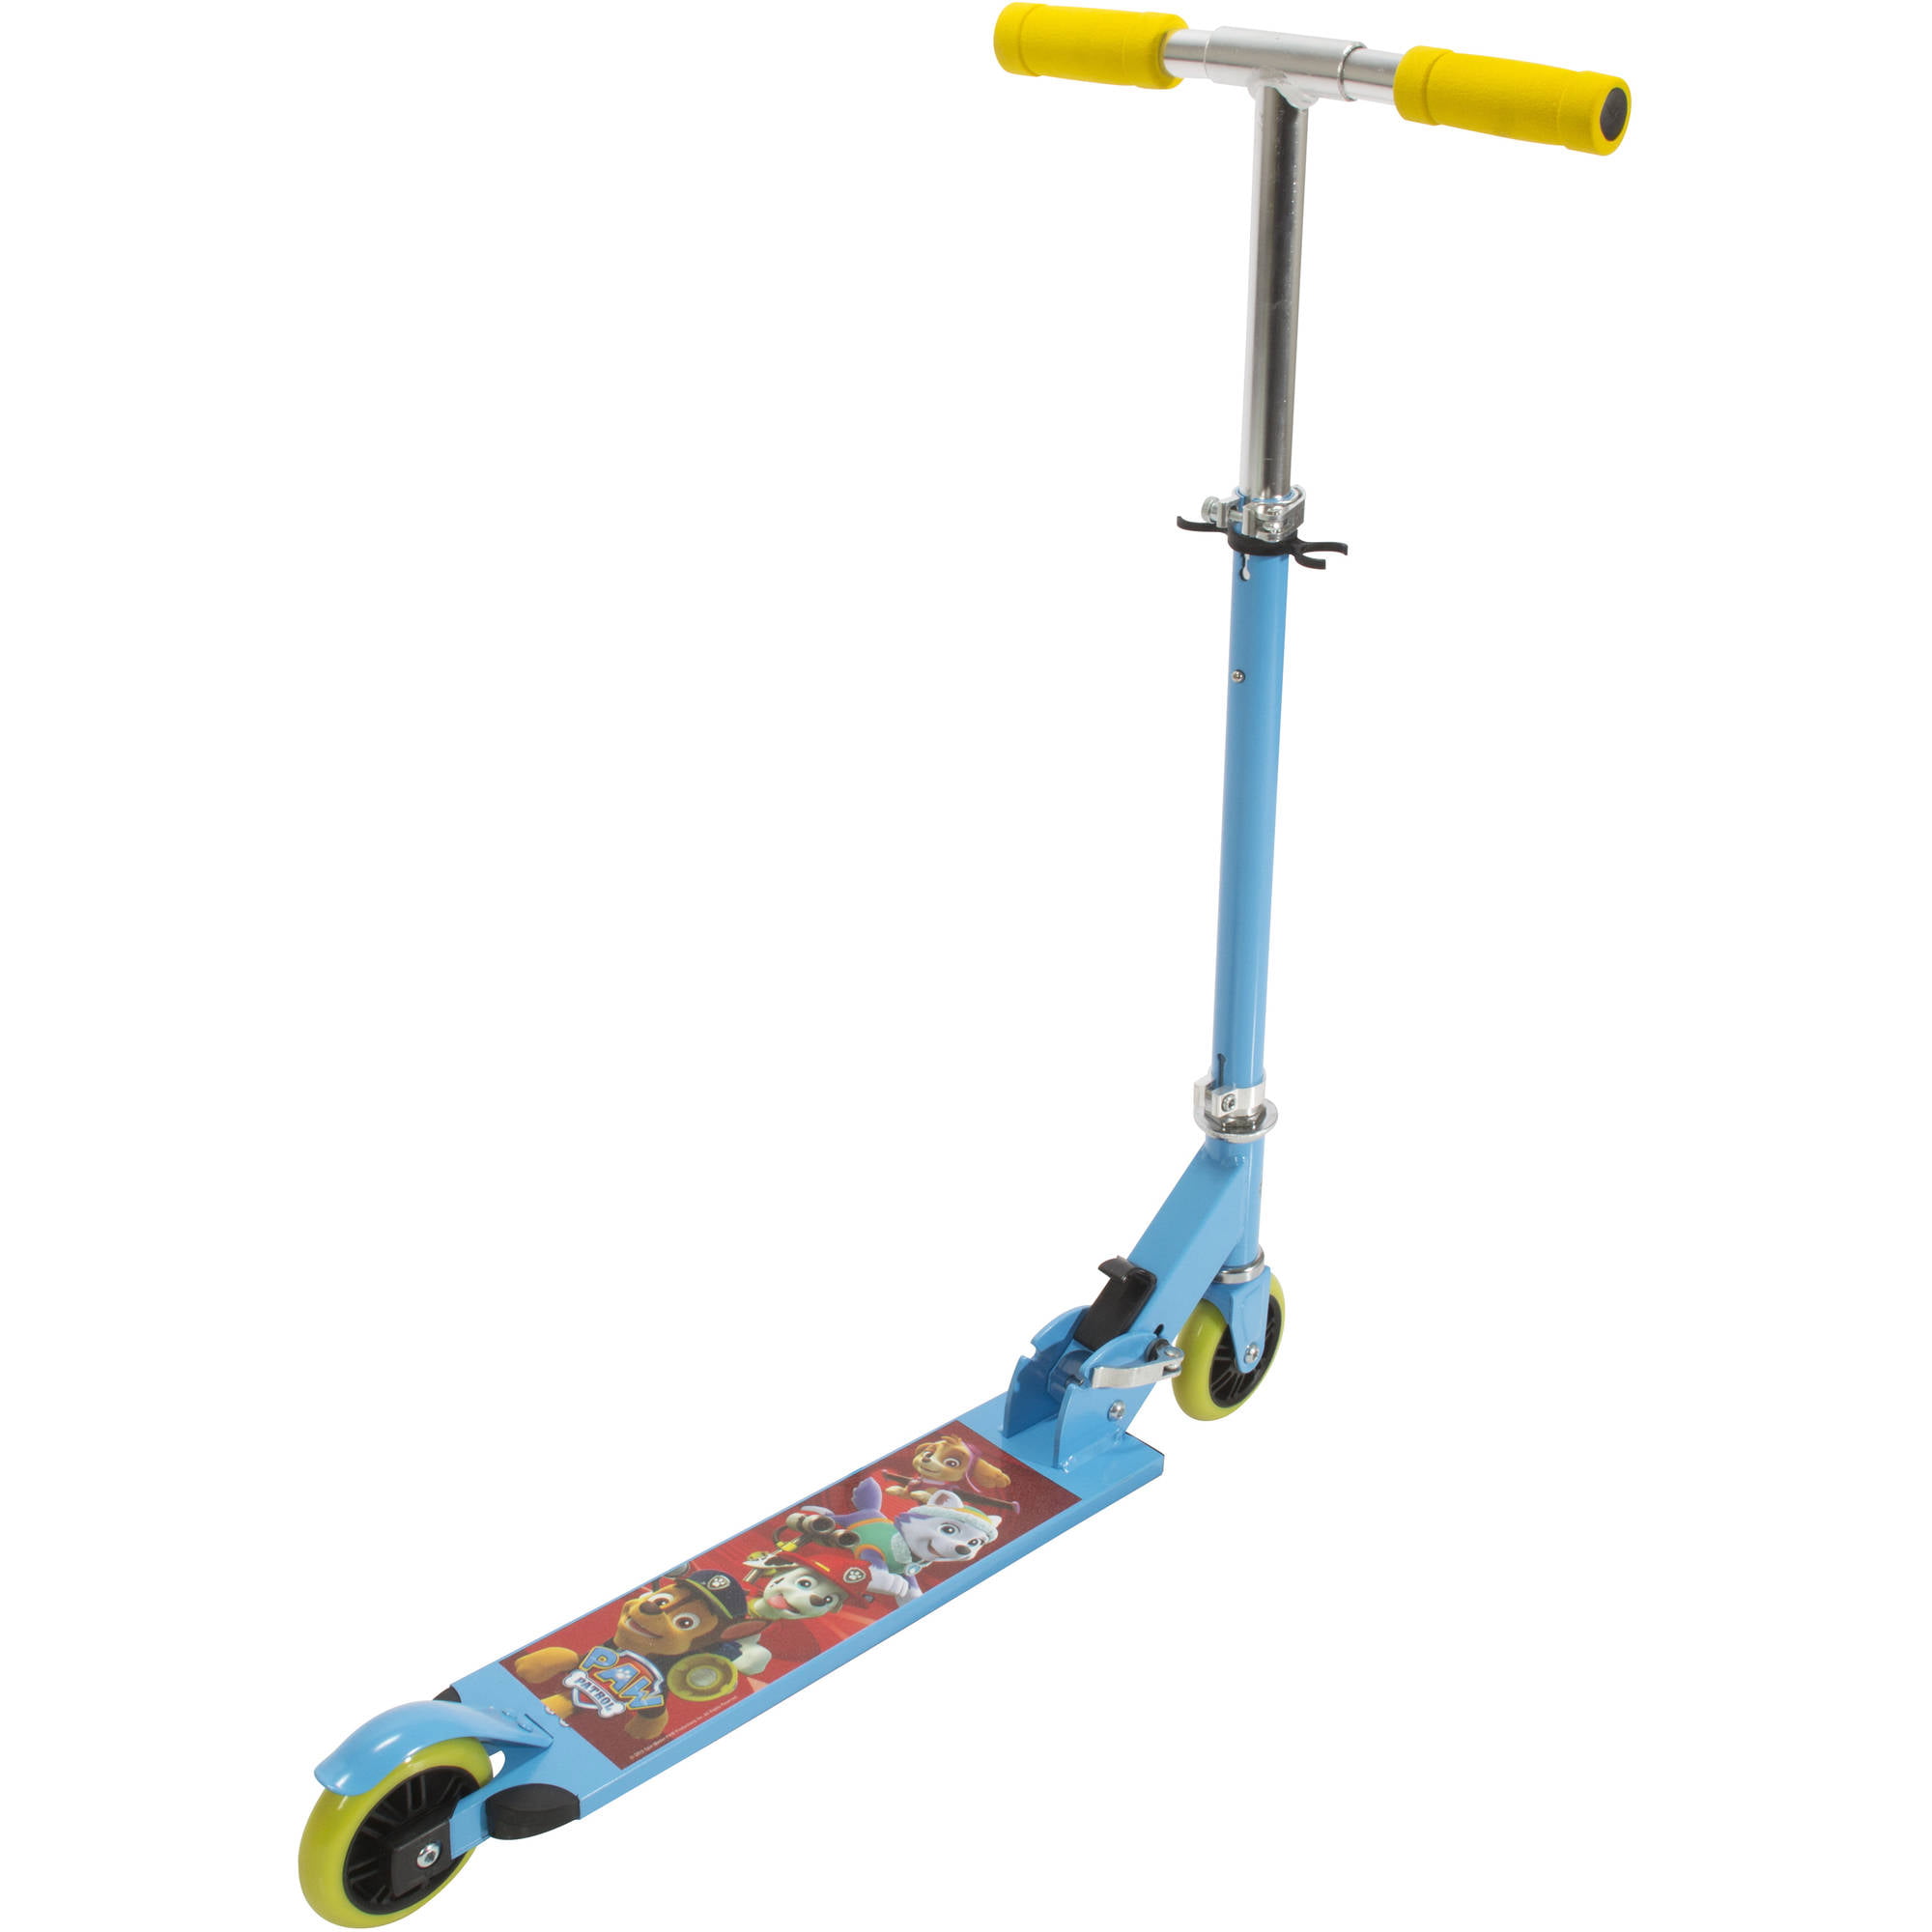 2 wheel scooter for 4 year old